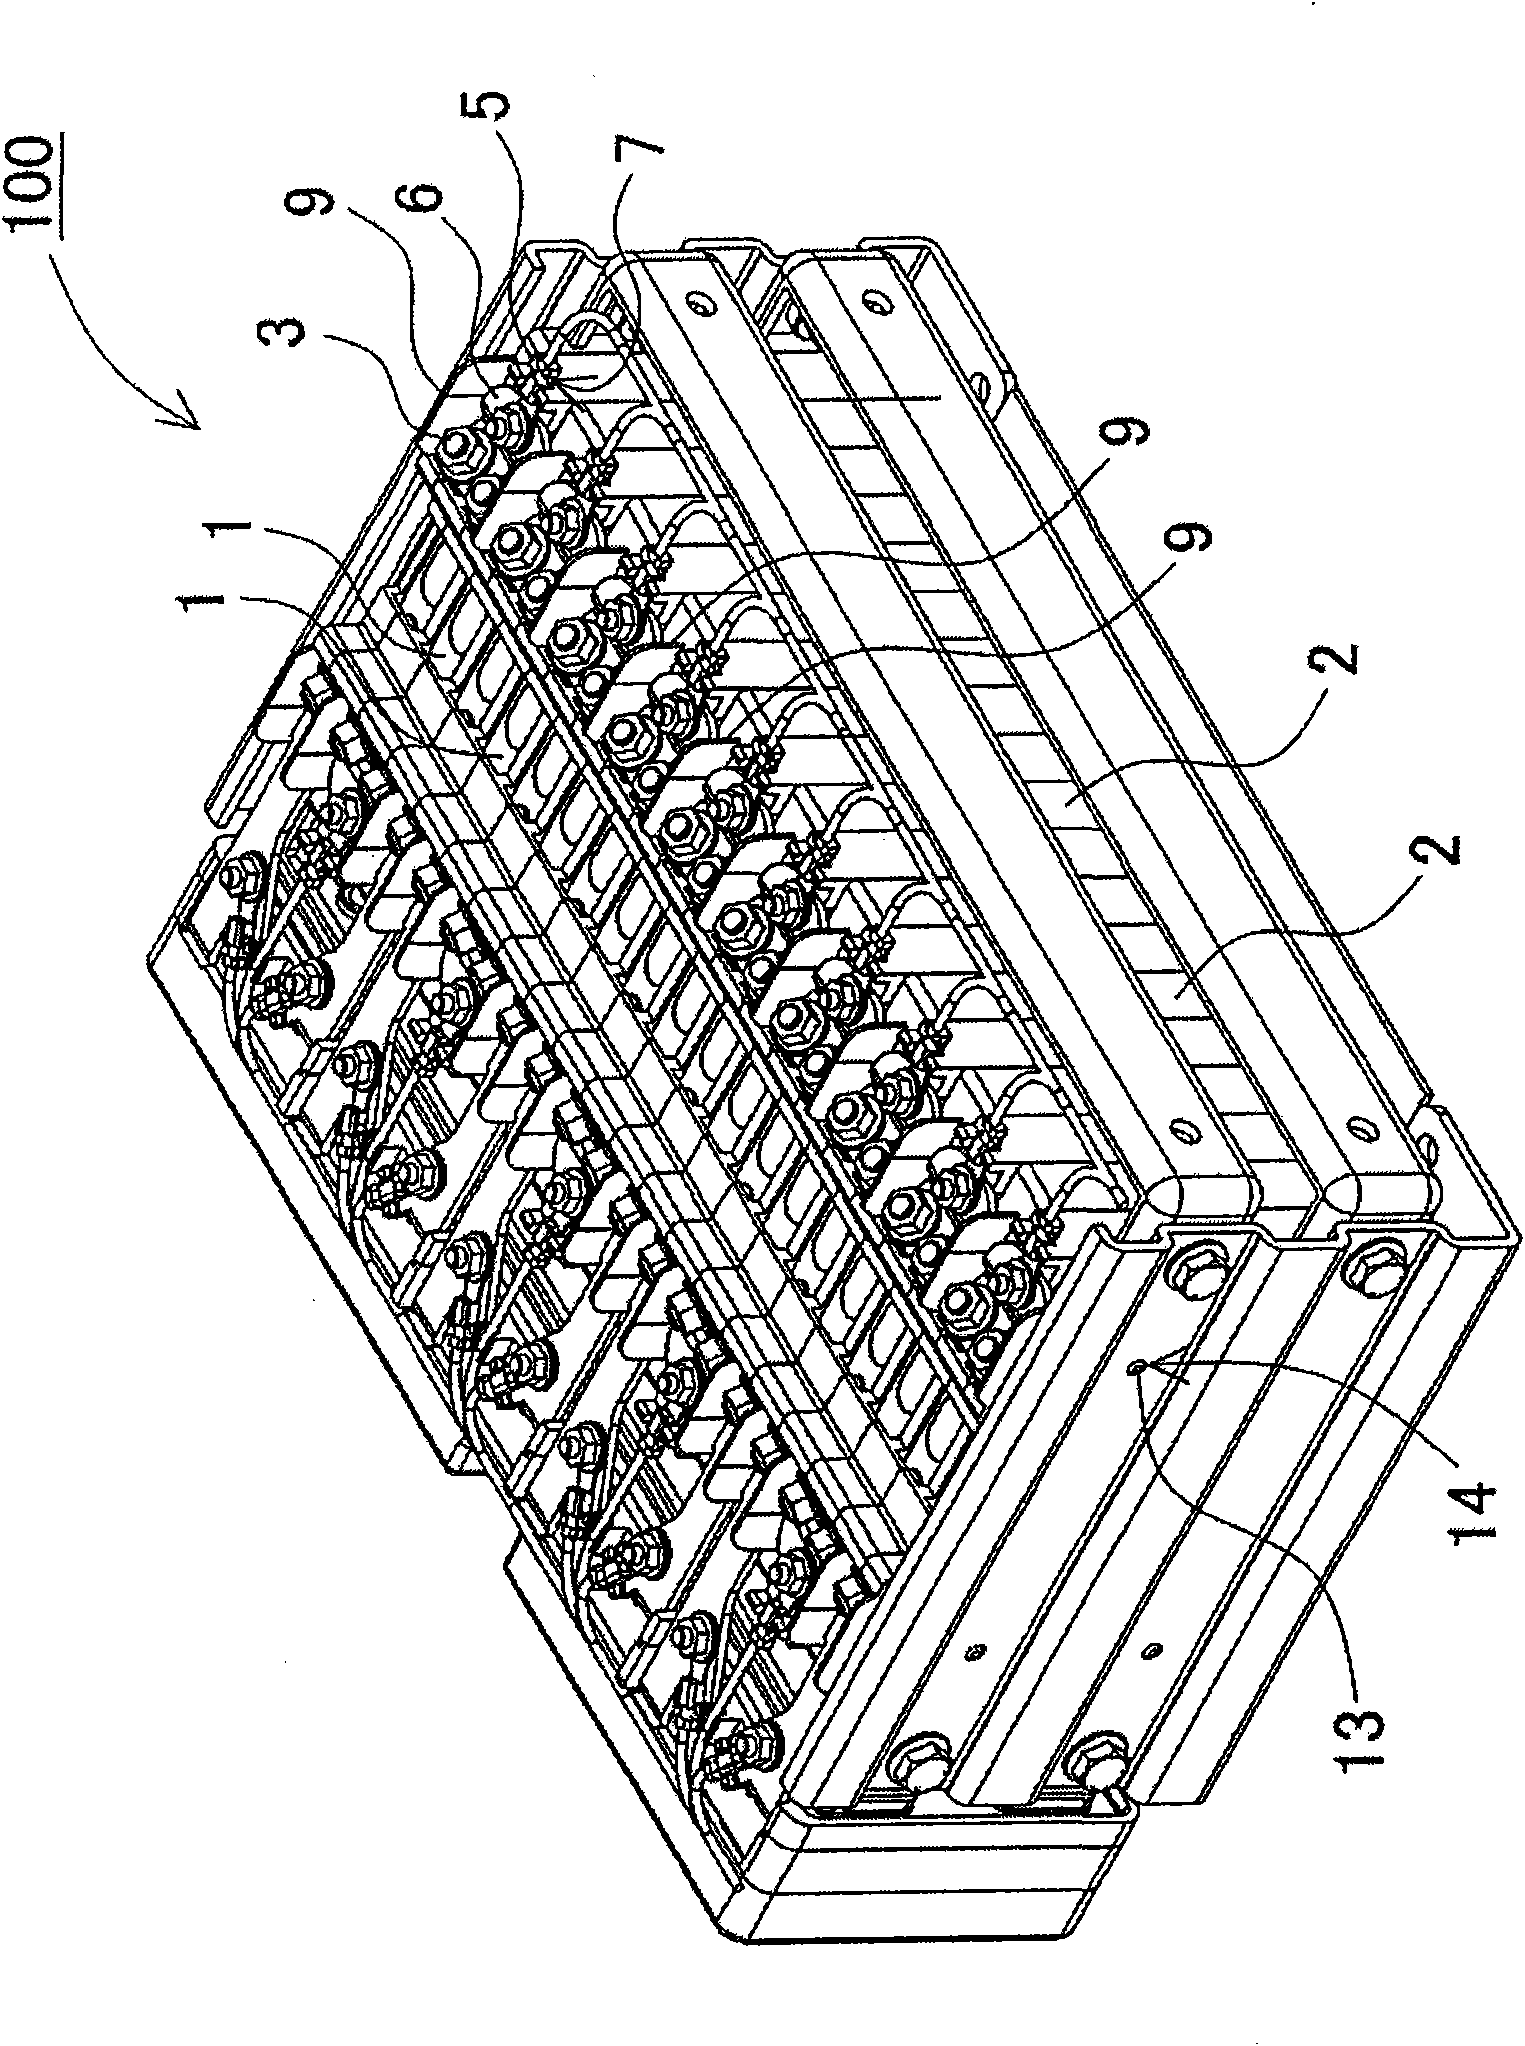 Battery array and battery array separator